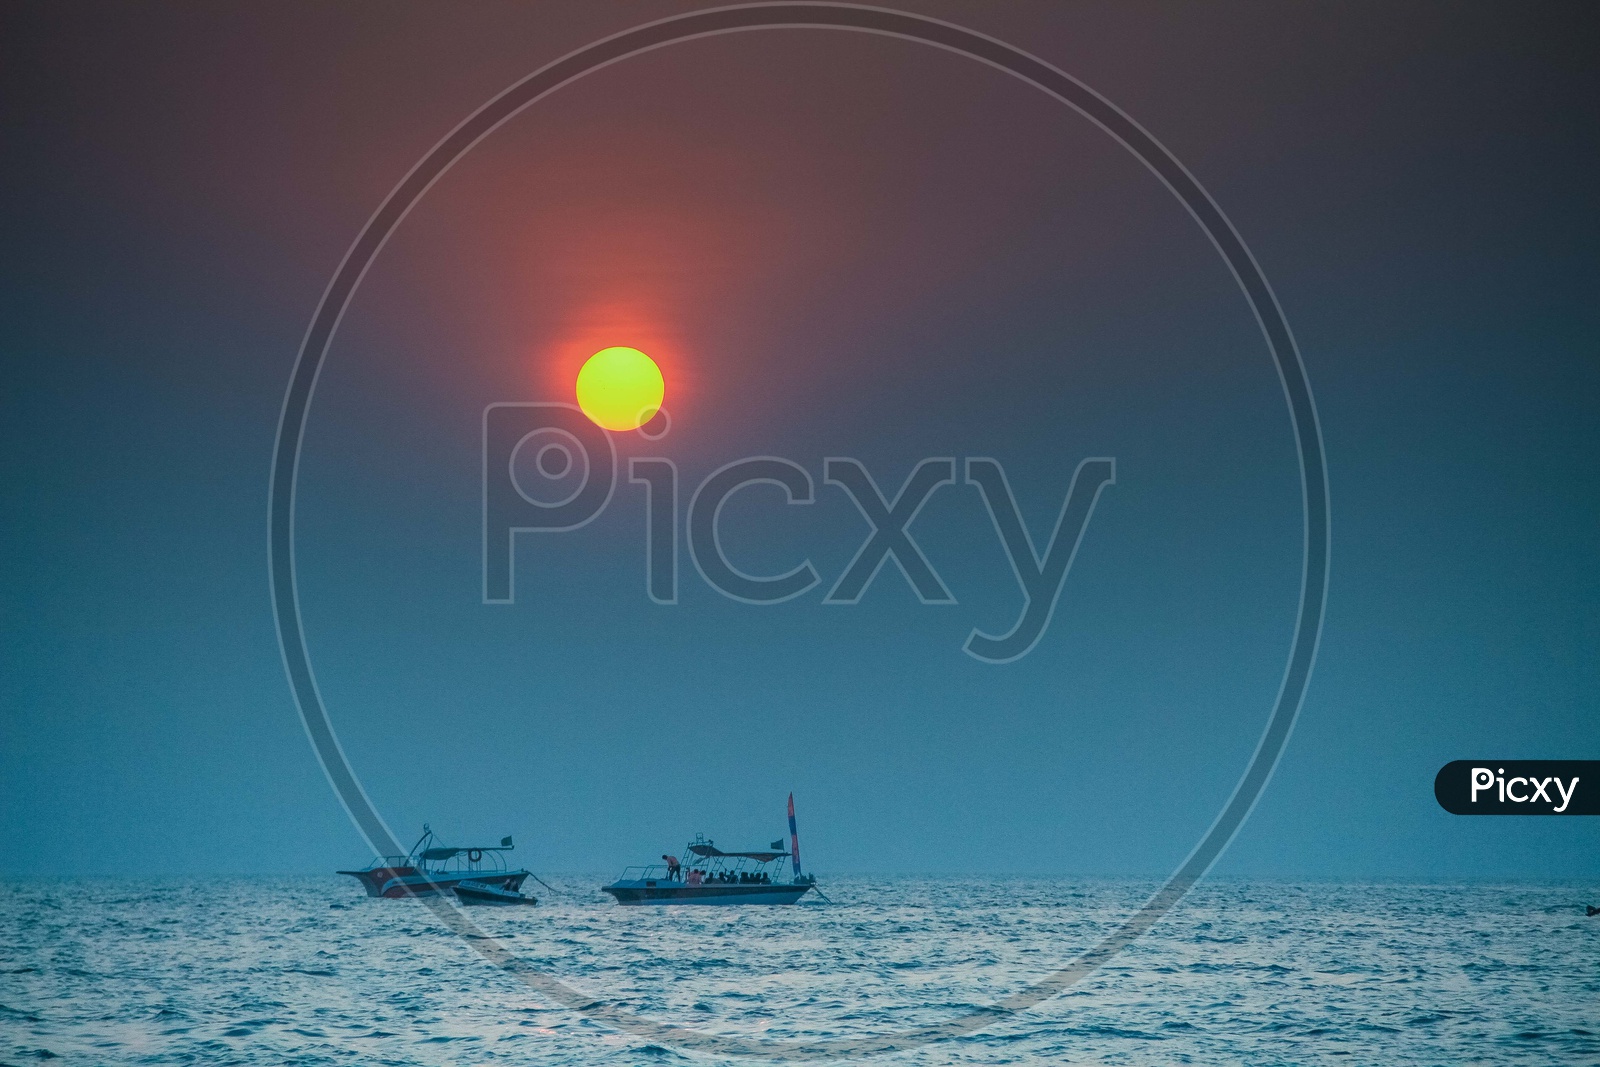 Beautiful sunset view with boats sailing in the foreground